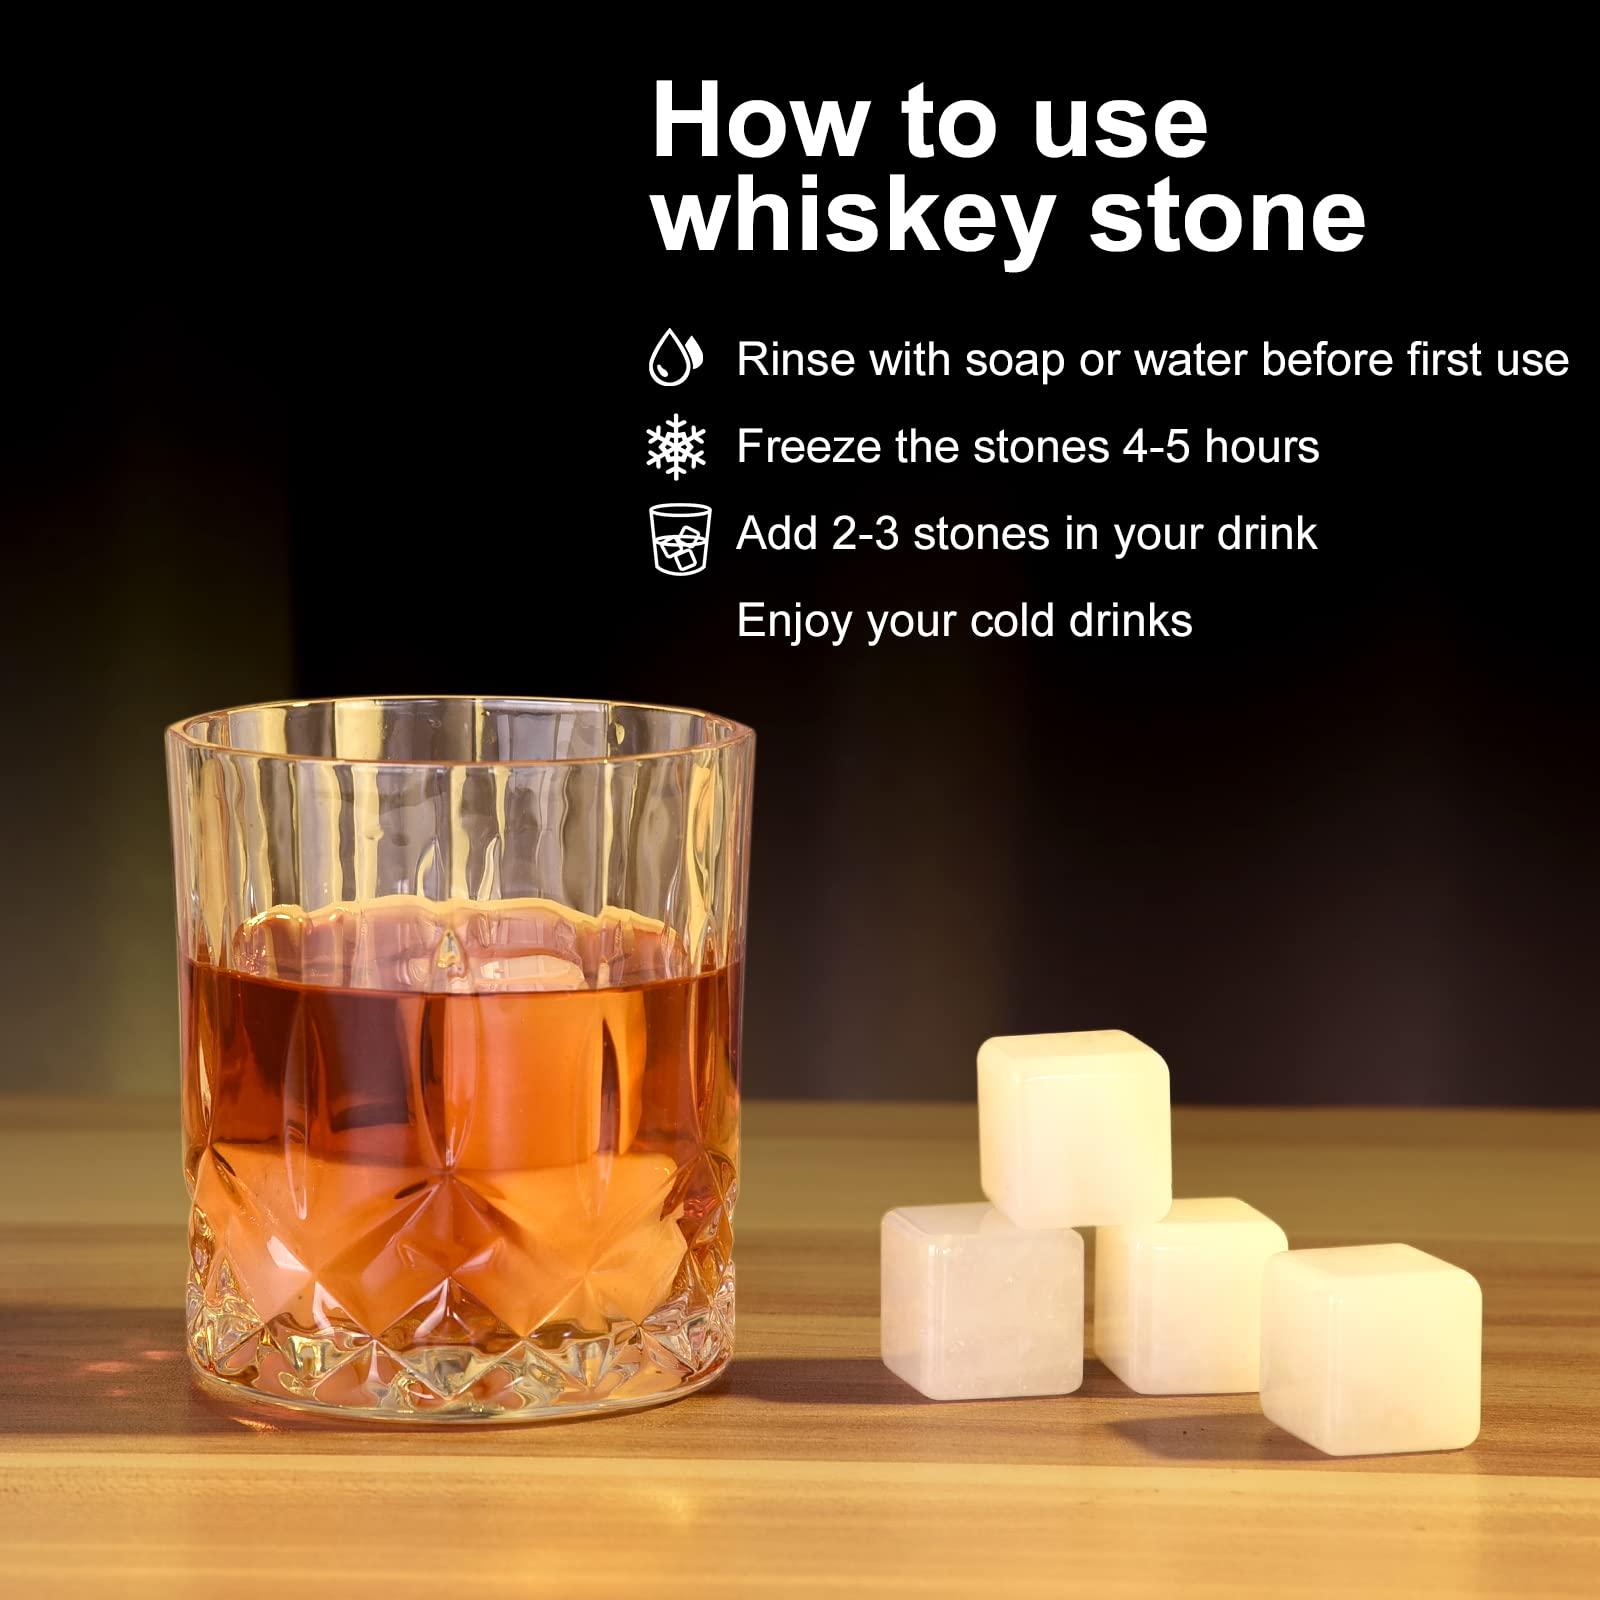 EooCoo 8pcs Marble Whisky Stones Gift Set for Men, Premium Wooden Box with Glasses,Two-Color Design Suitable for Couples/Friends, Easy Storage, for Anniversary Birthday Wedding Housewarming 3